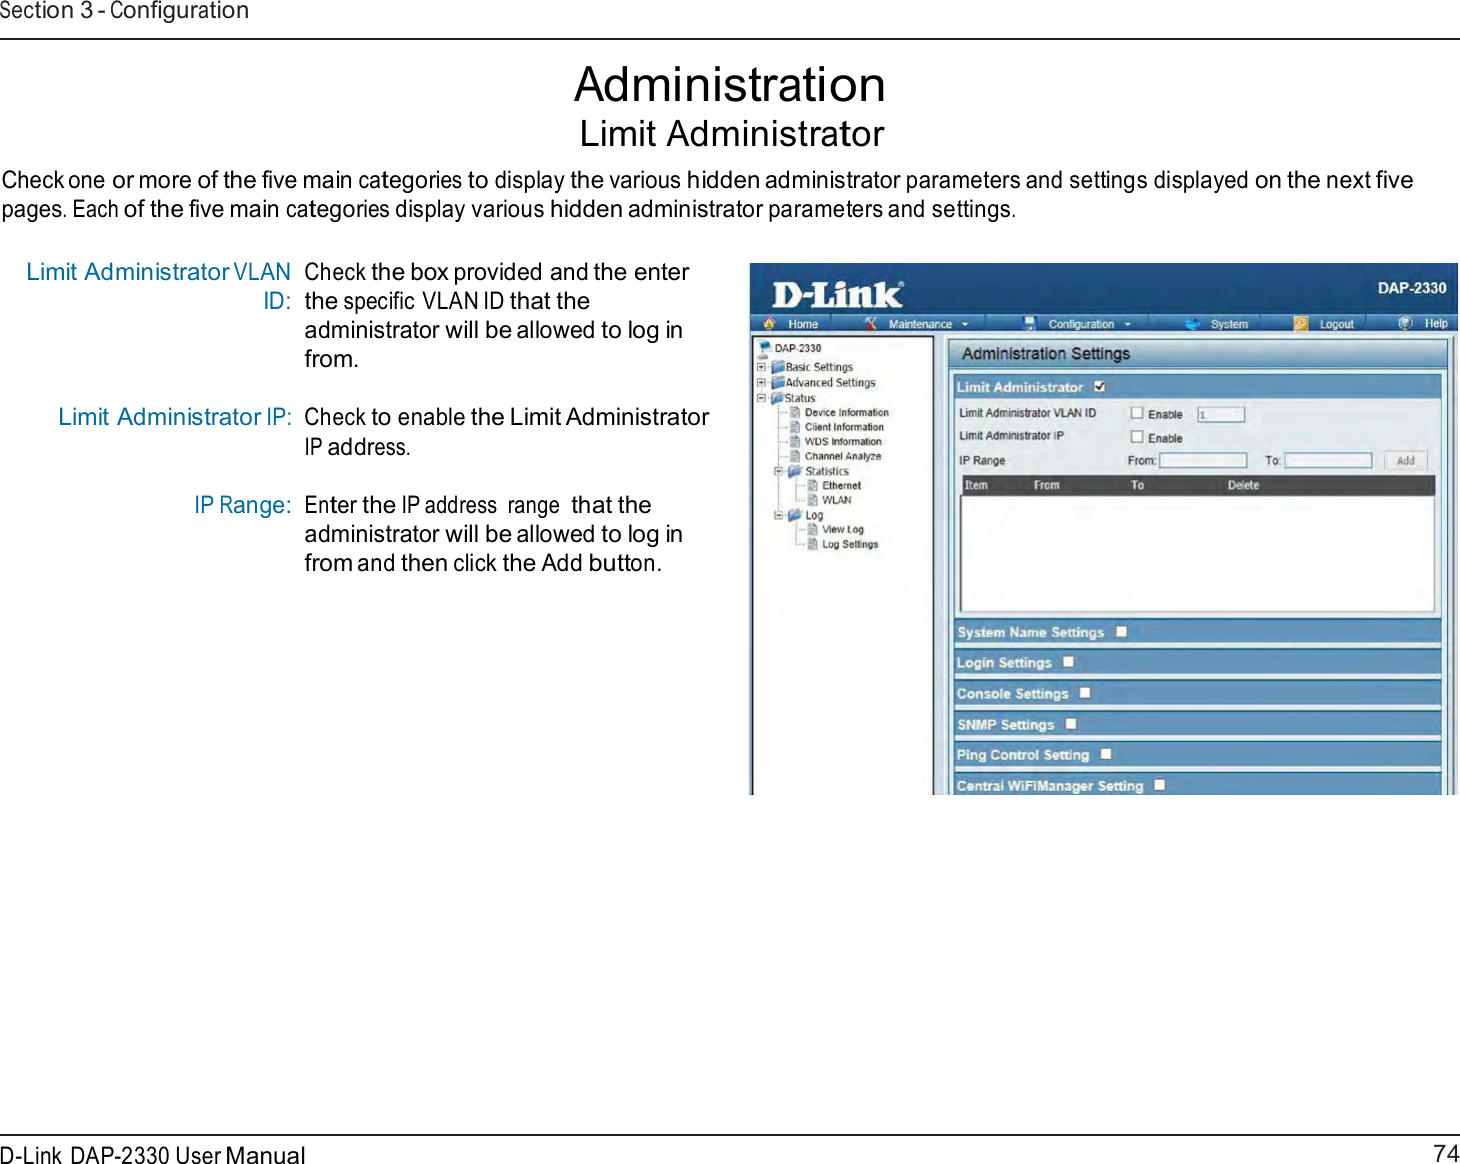 74 D-Link DAP-2330 User ManualSection 3 - Configuration    Administration Limit Administrator  Check one or more of the five main categories to display the various hidden administrator parameters and settings displayed on the next five pages. Each of the five main categories display various hidden administrator parameters and settings.  Limit Administrator VLAN ID:     Limit Administrator IP: IP Range: Check the box provided and the enter the specific VLAN ID that the administrator will be allowed to log in from.  Check to enable the Limit Administrator IP address.   Enter the IP address  range that the administrator will be allowed to log in from and then click the Add button. 